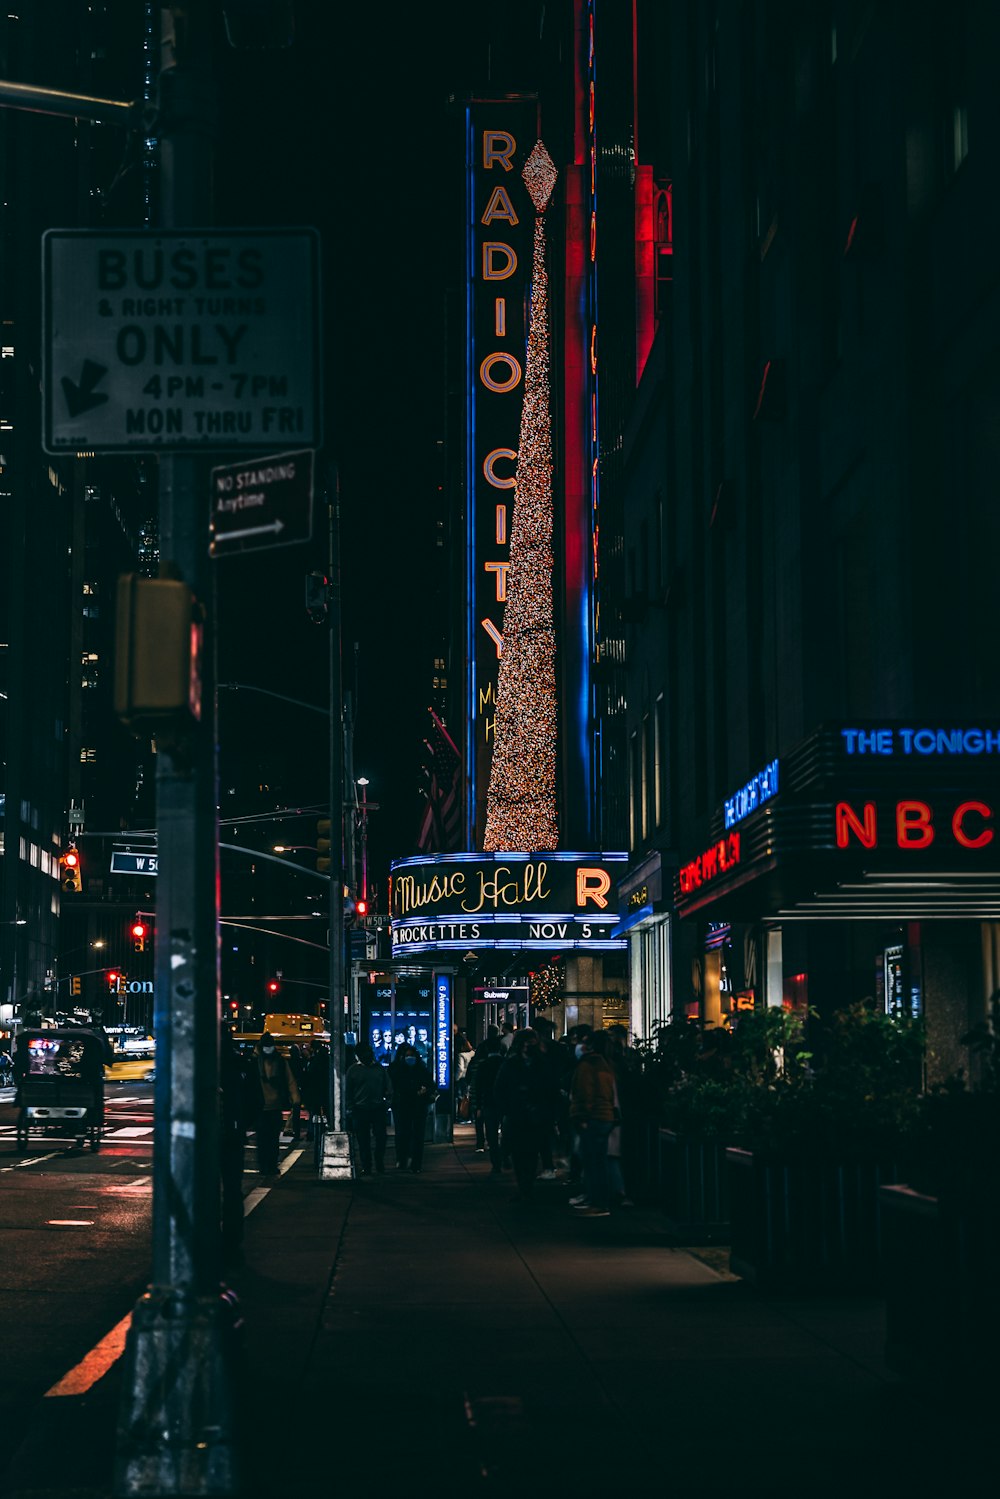 a city street at night with a radio city sign